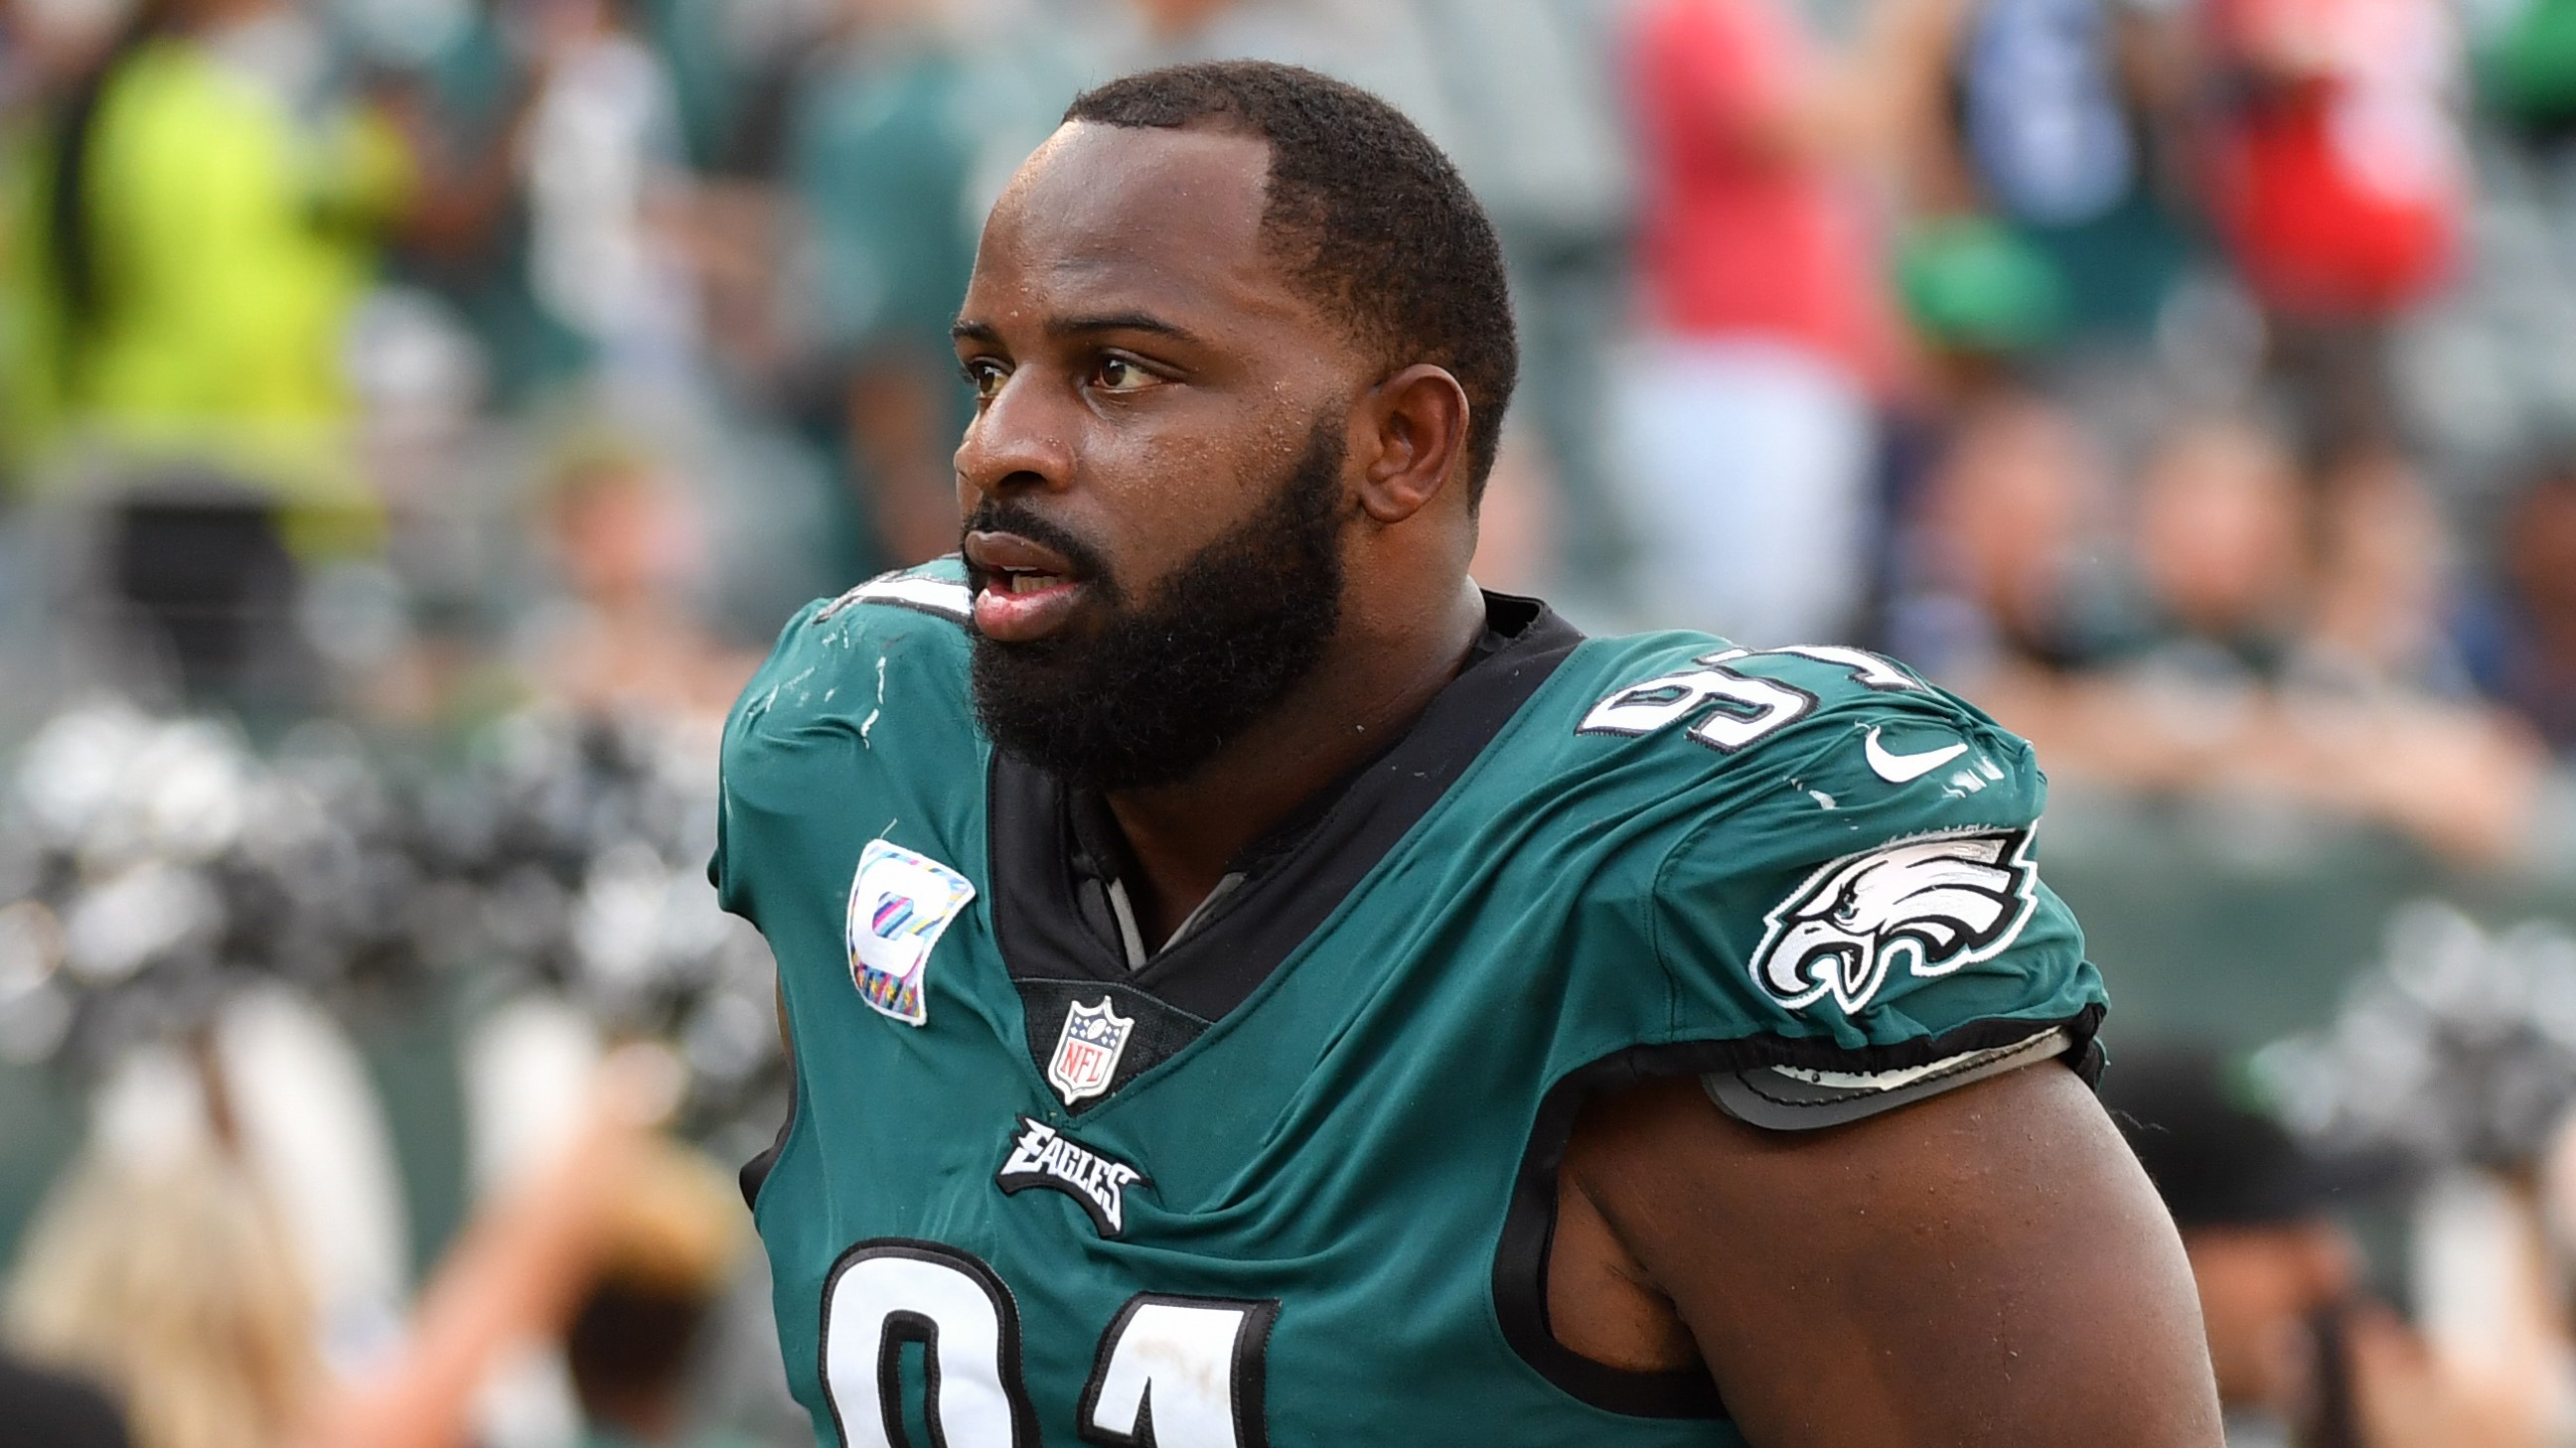 Here are 4 options for Eagles to replace Fletcher Cox in the